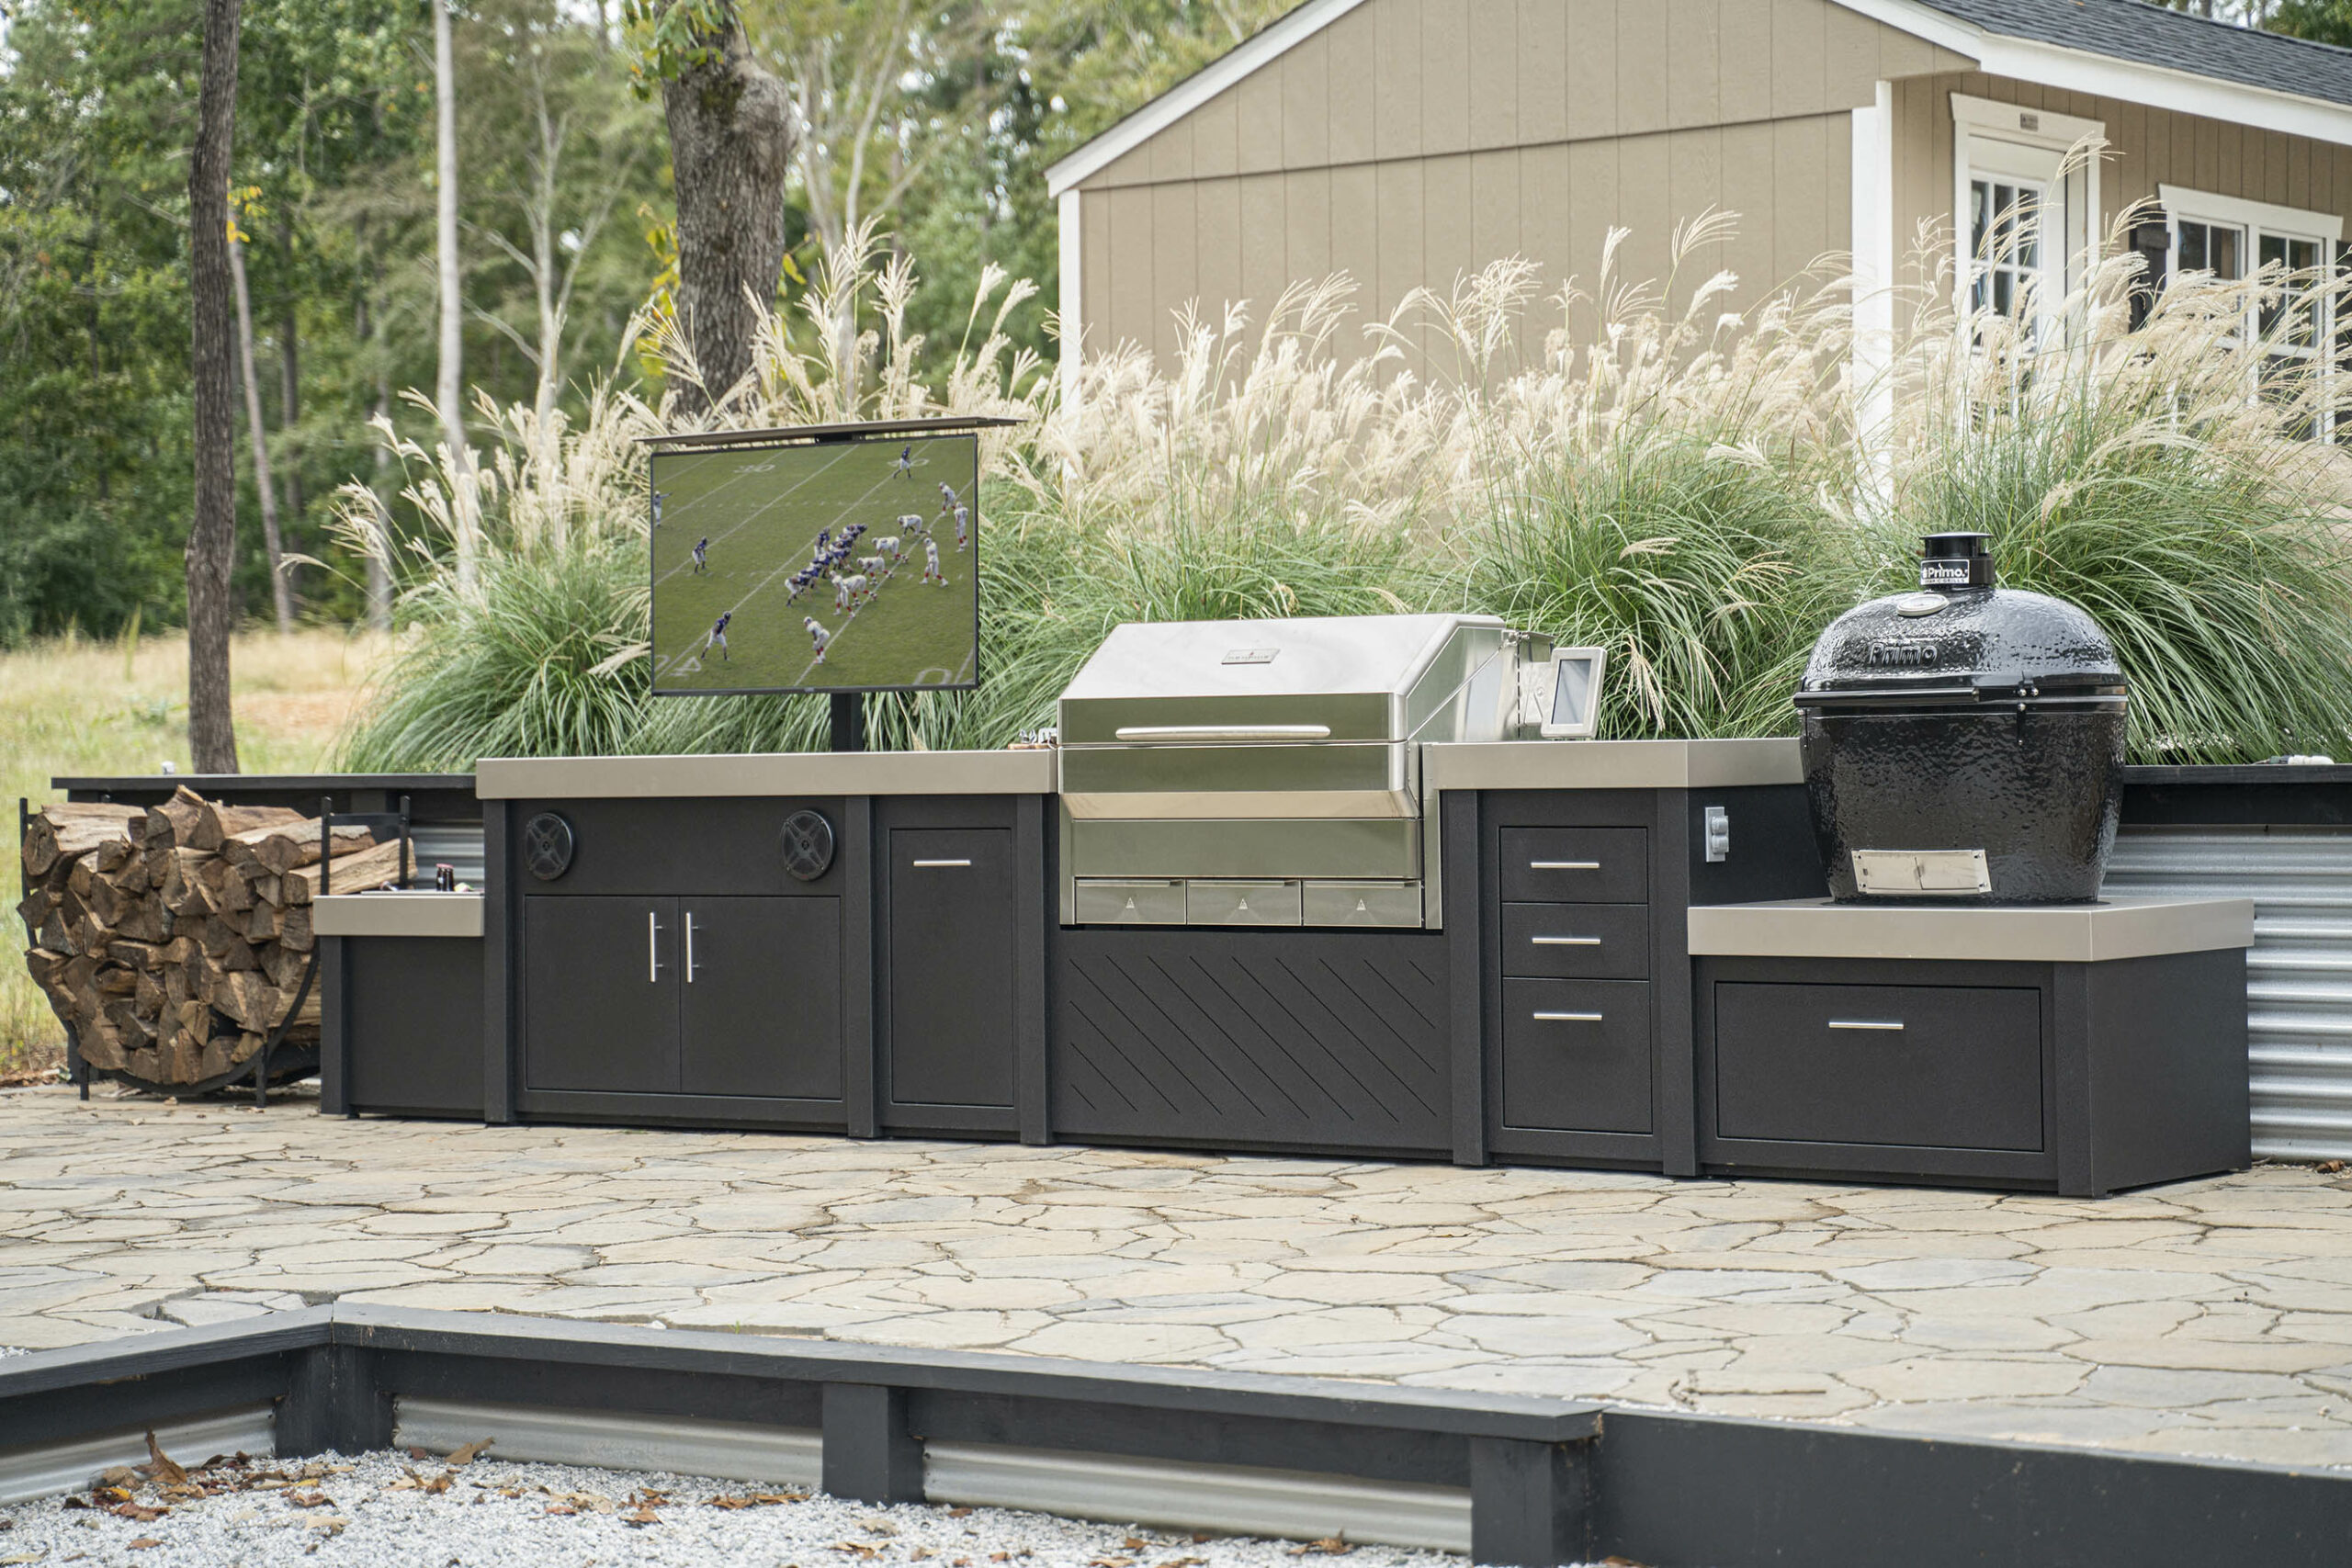 Creating An Inexpensive Outdoor Kitchen With Concrete Countertops